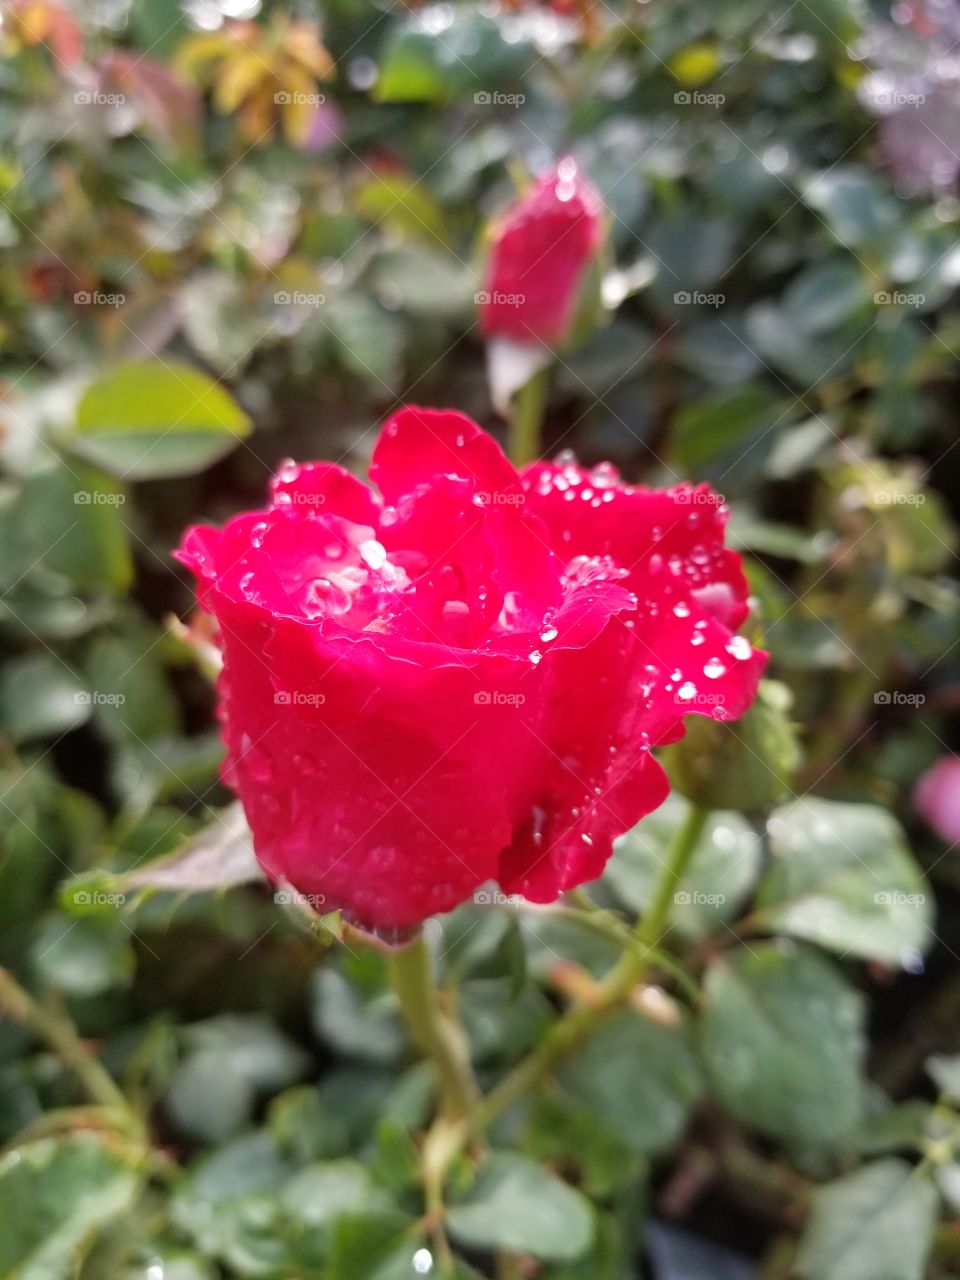 Dew drops and rose